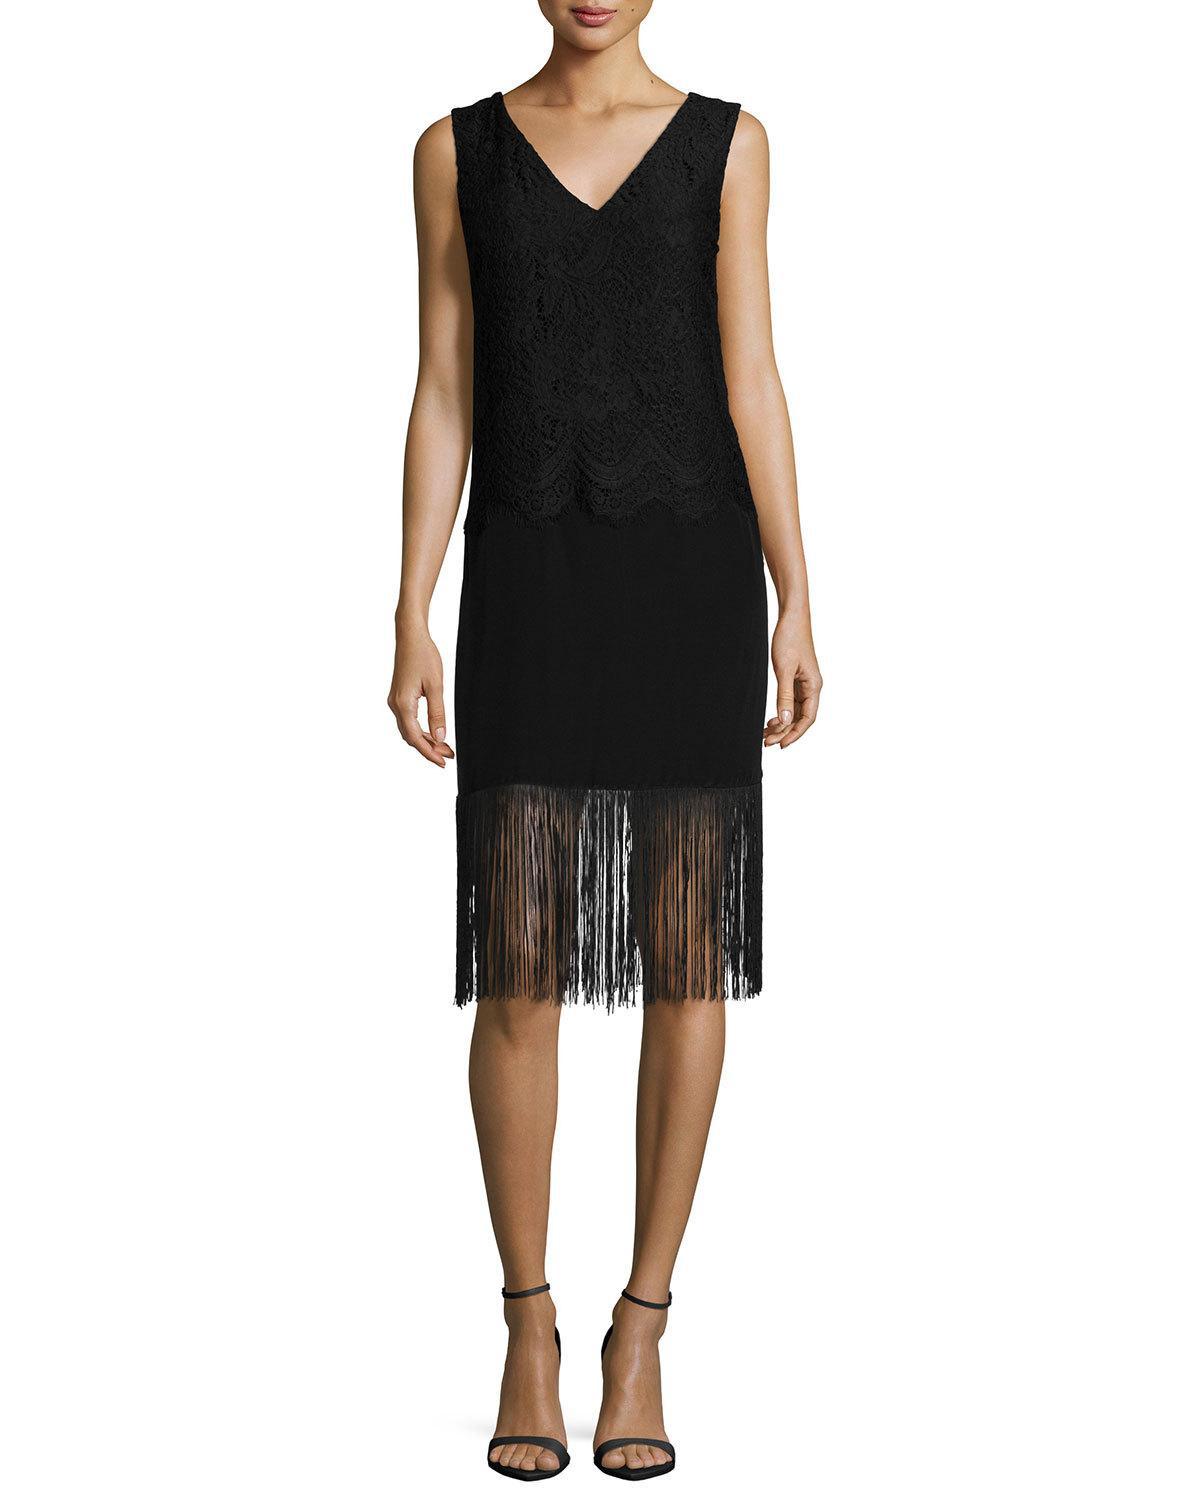 Lyst - Nicole Miller Fringed Silk and Lace Dress in Black